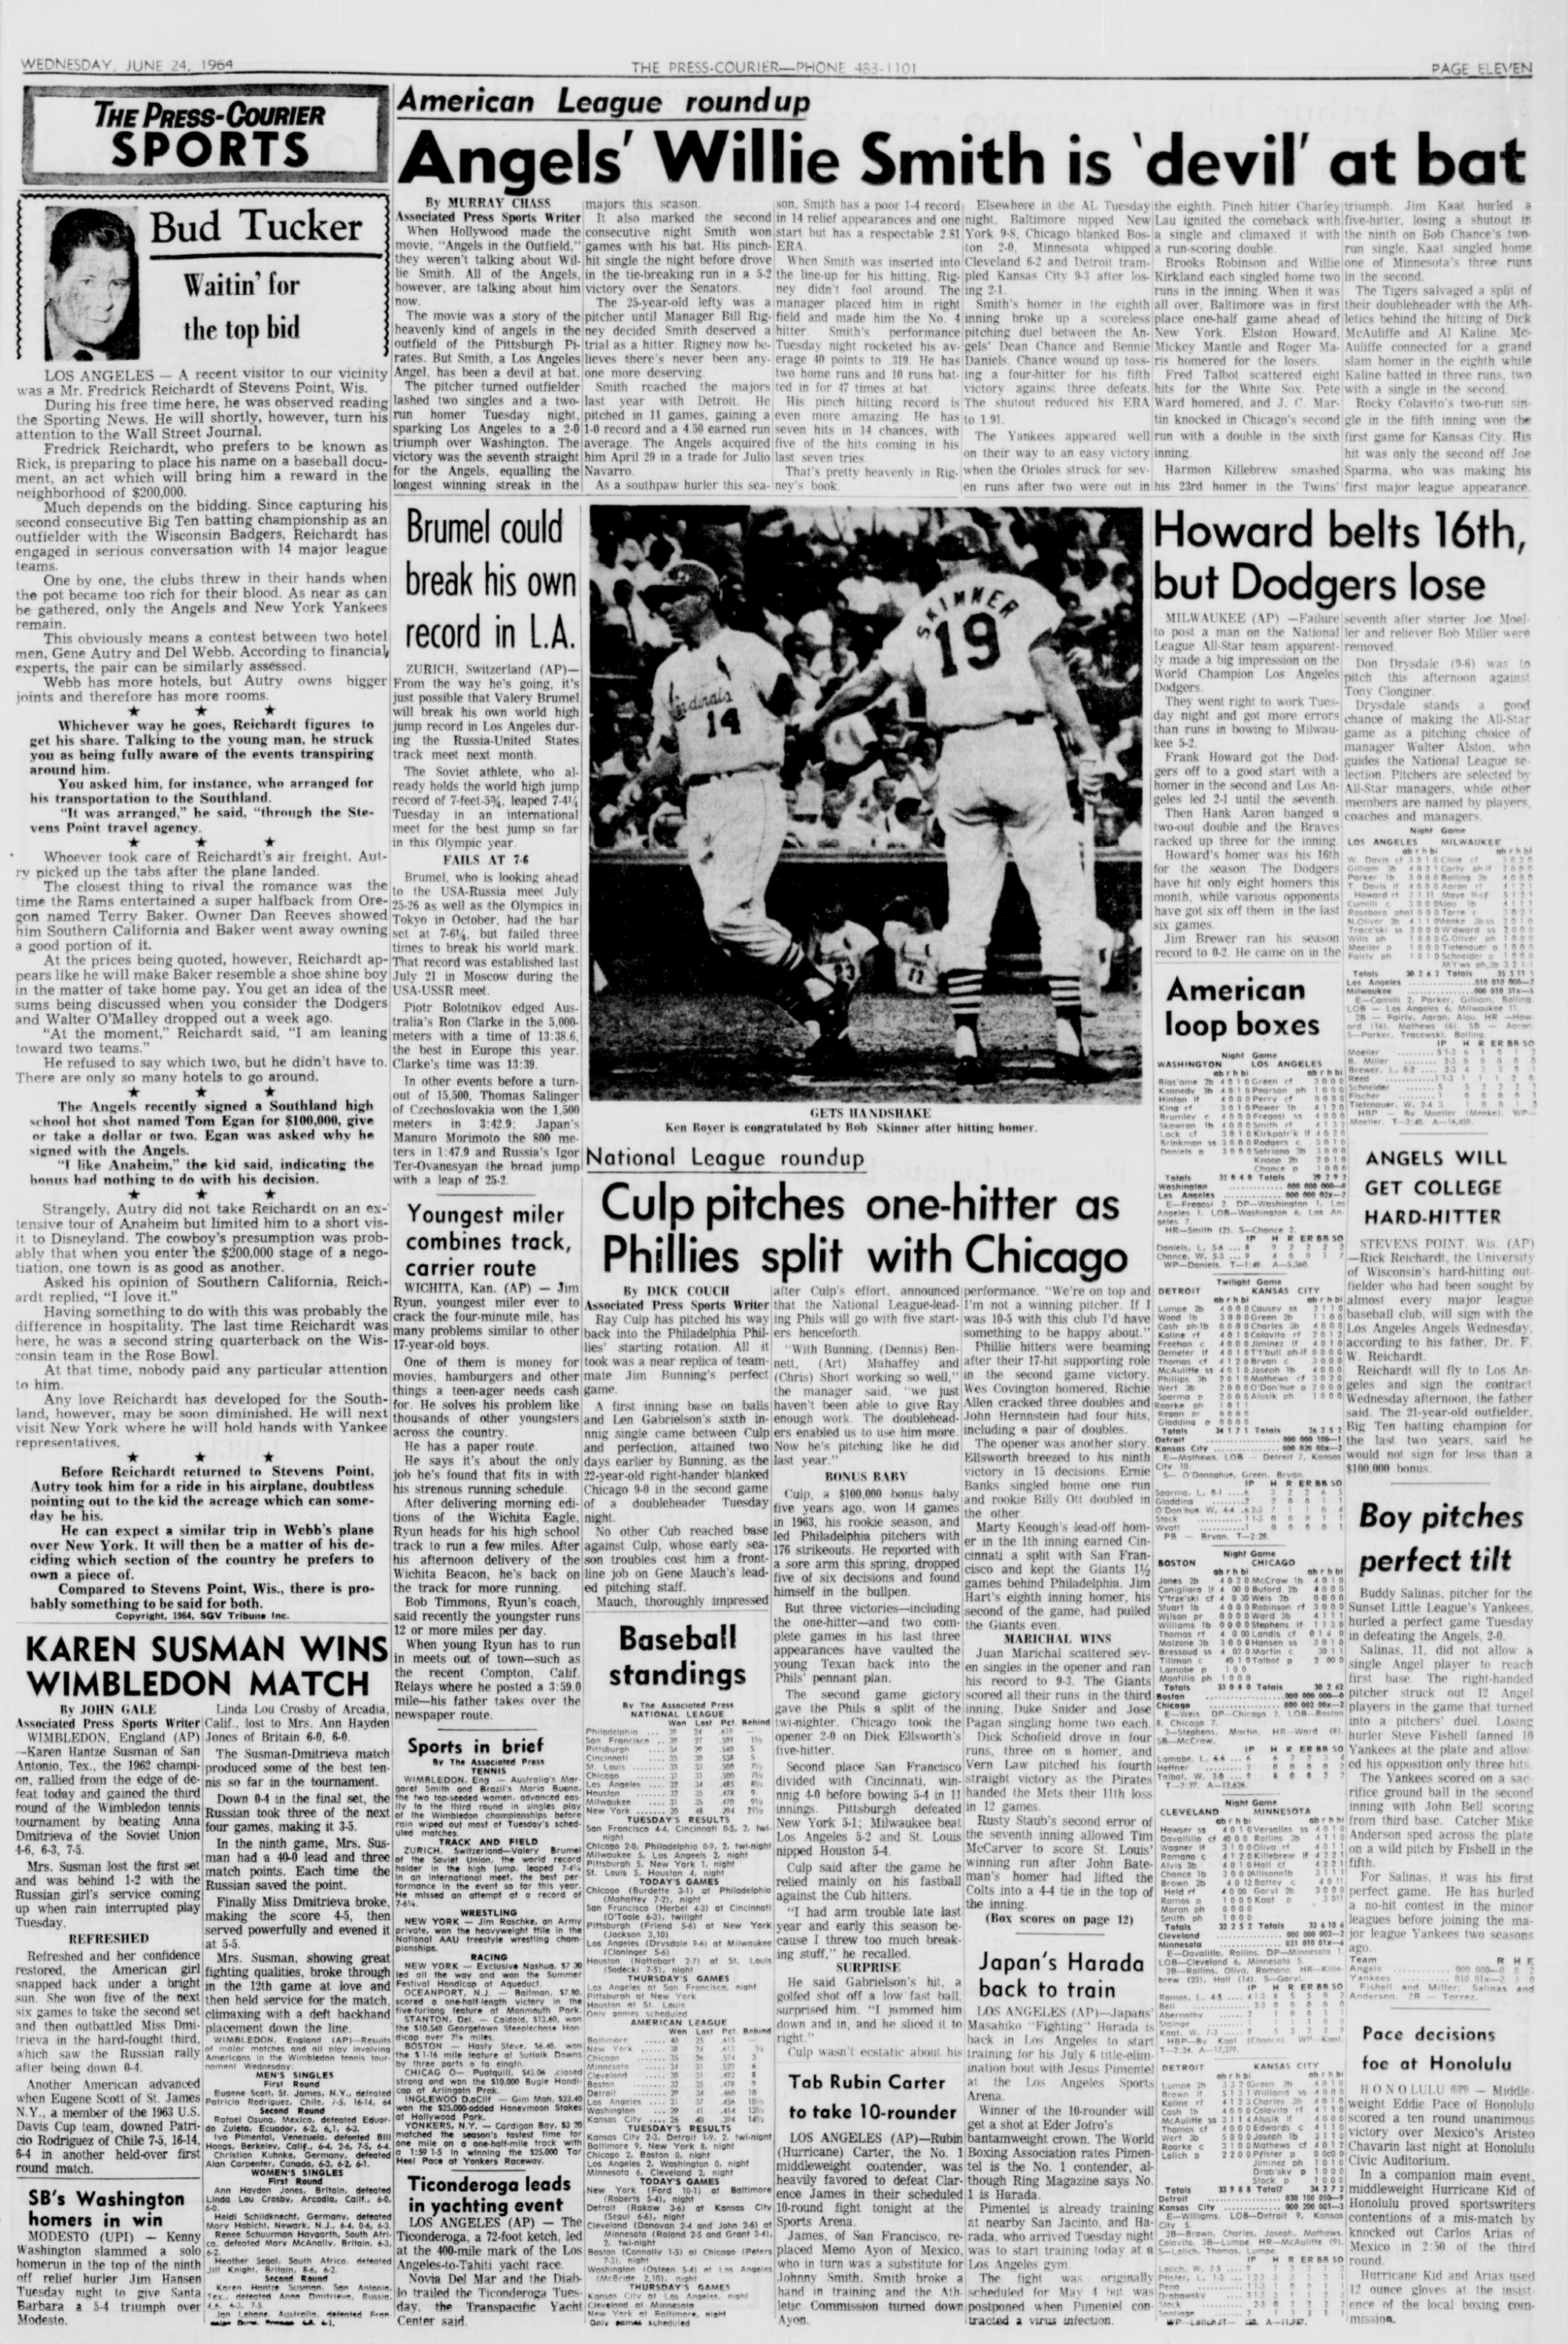 The Oxnard Press-Courier story on 11-year-old Buddy Salinas pitching a perfect game in Little League in 1964.